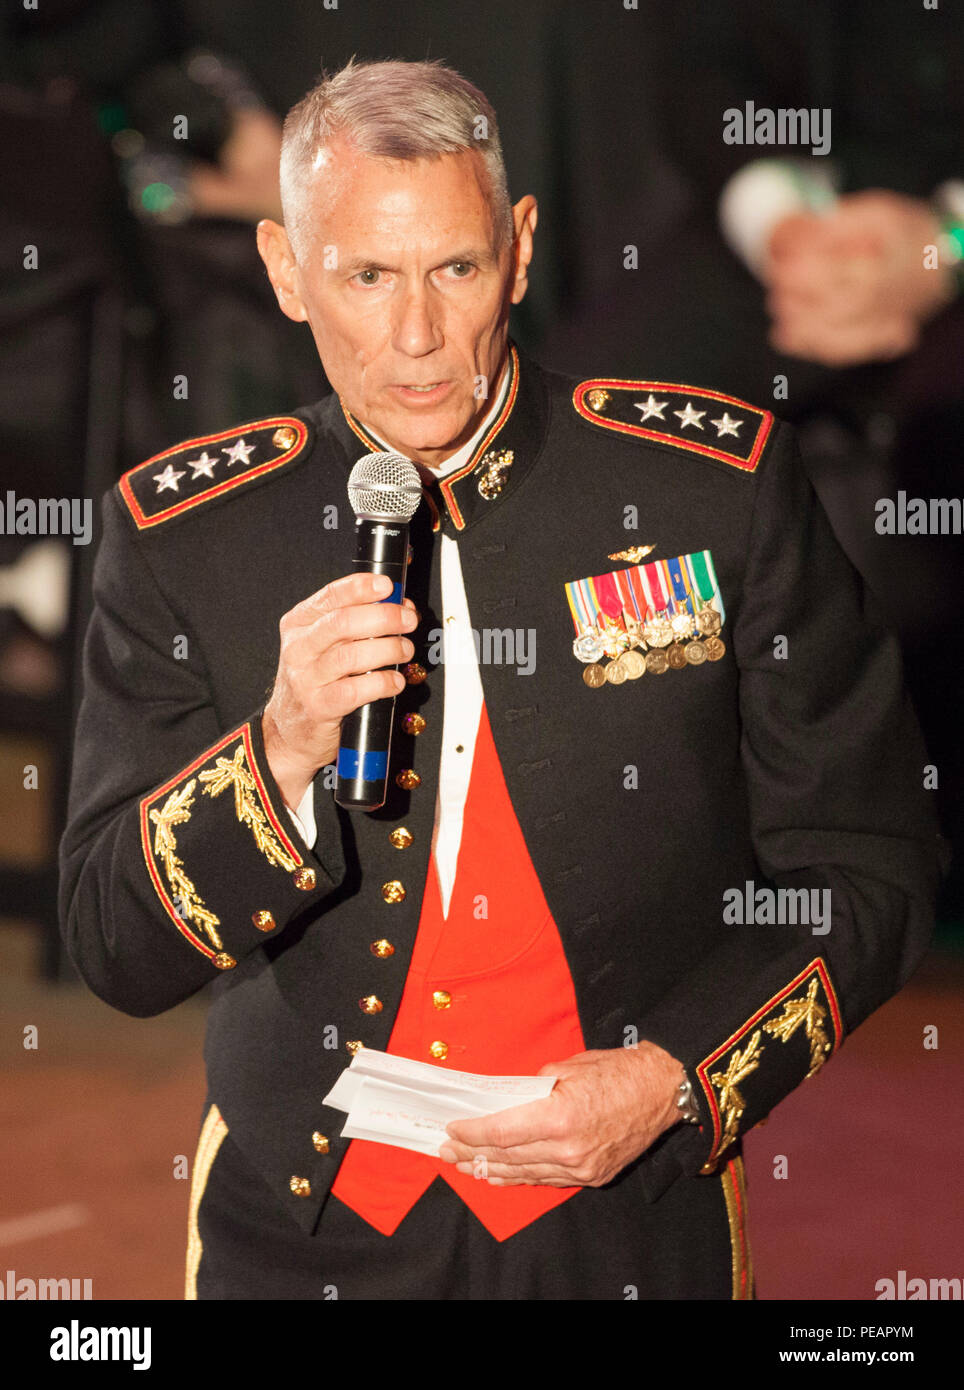 U.S. Marine Lt. Gen. Rex C. McMillian, Commander of Marine Forces Reserve and Marine Forces North, gives a speech during the celebration of the 240th U.S. Marine Corps Birthday Ball at Mardi Gras World, New Orleans, La., Nov. 21, 2015. This year’s celebration honors those past, present, and future Marines throughout history and marks the 240th Marine Corps Birthday since its founding on Nov. 10, 1775. (U.S. Marine Corps photo by Kimberly Aguirre/Released) Stock Photo